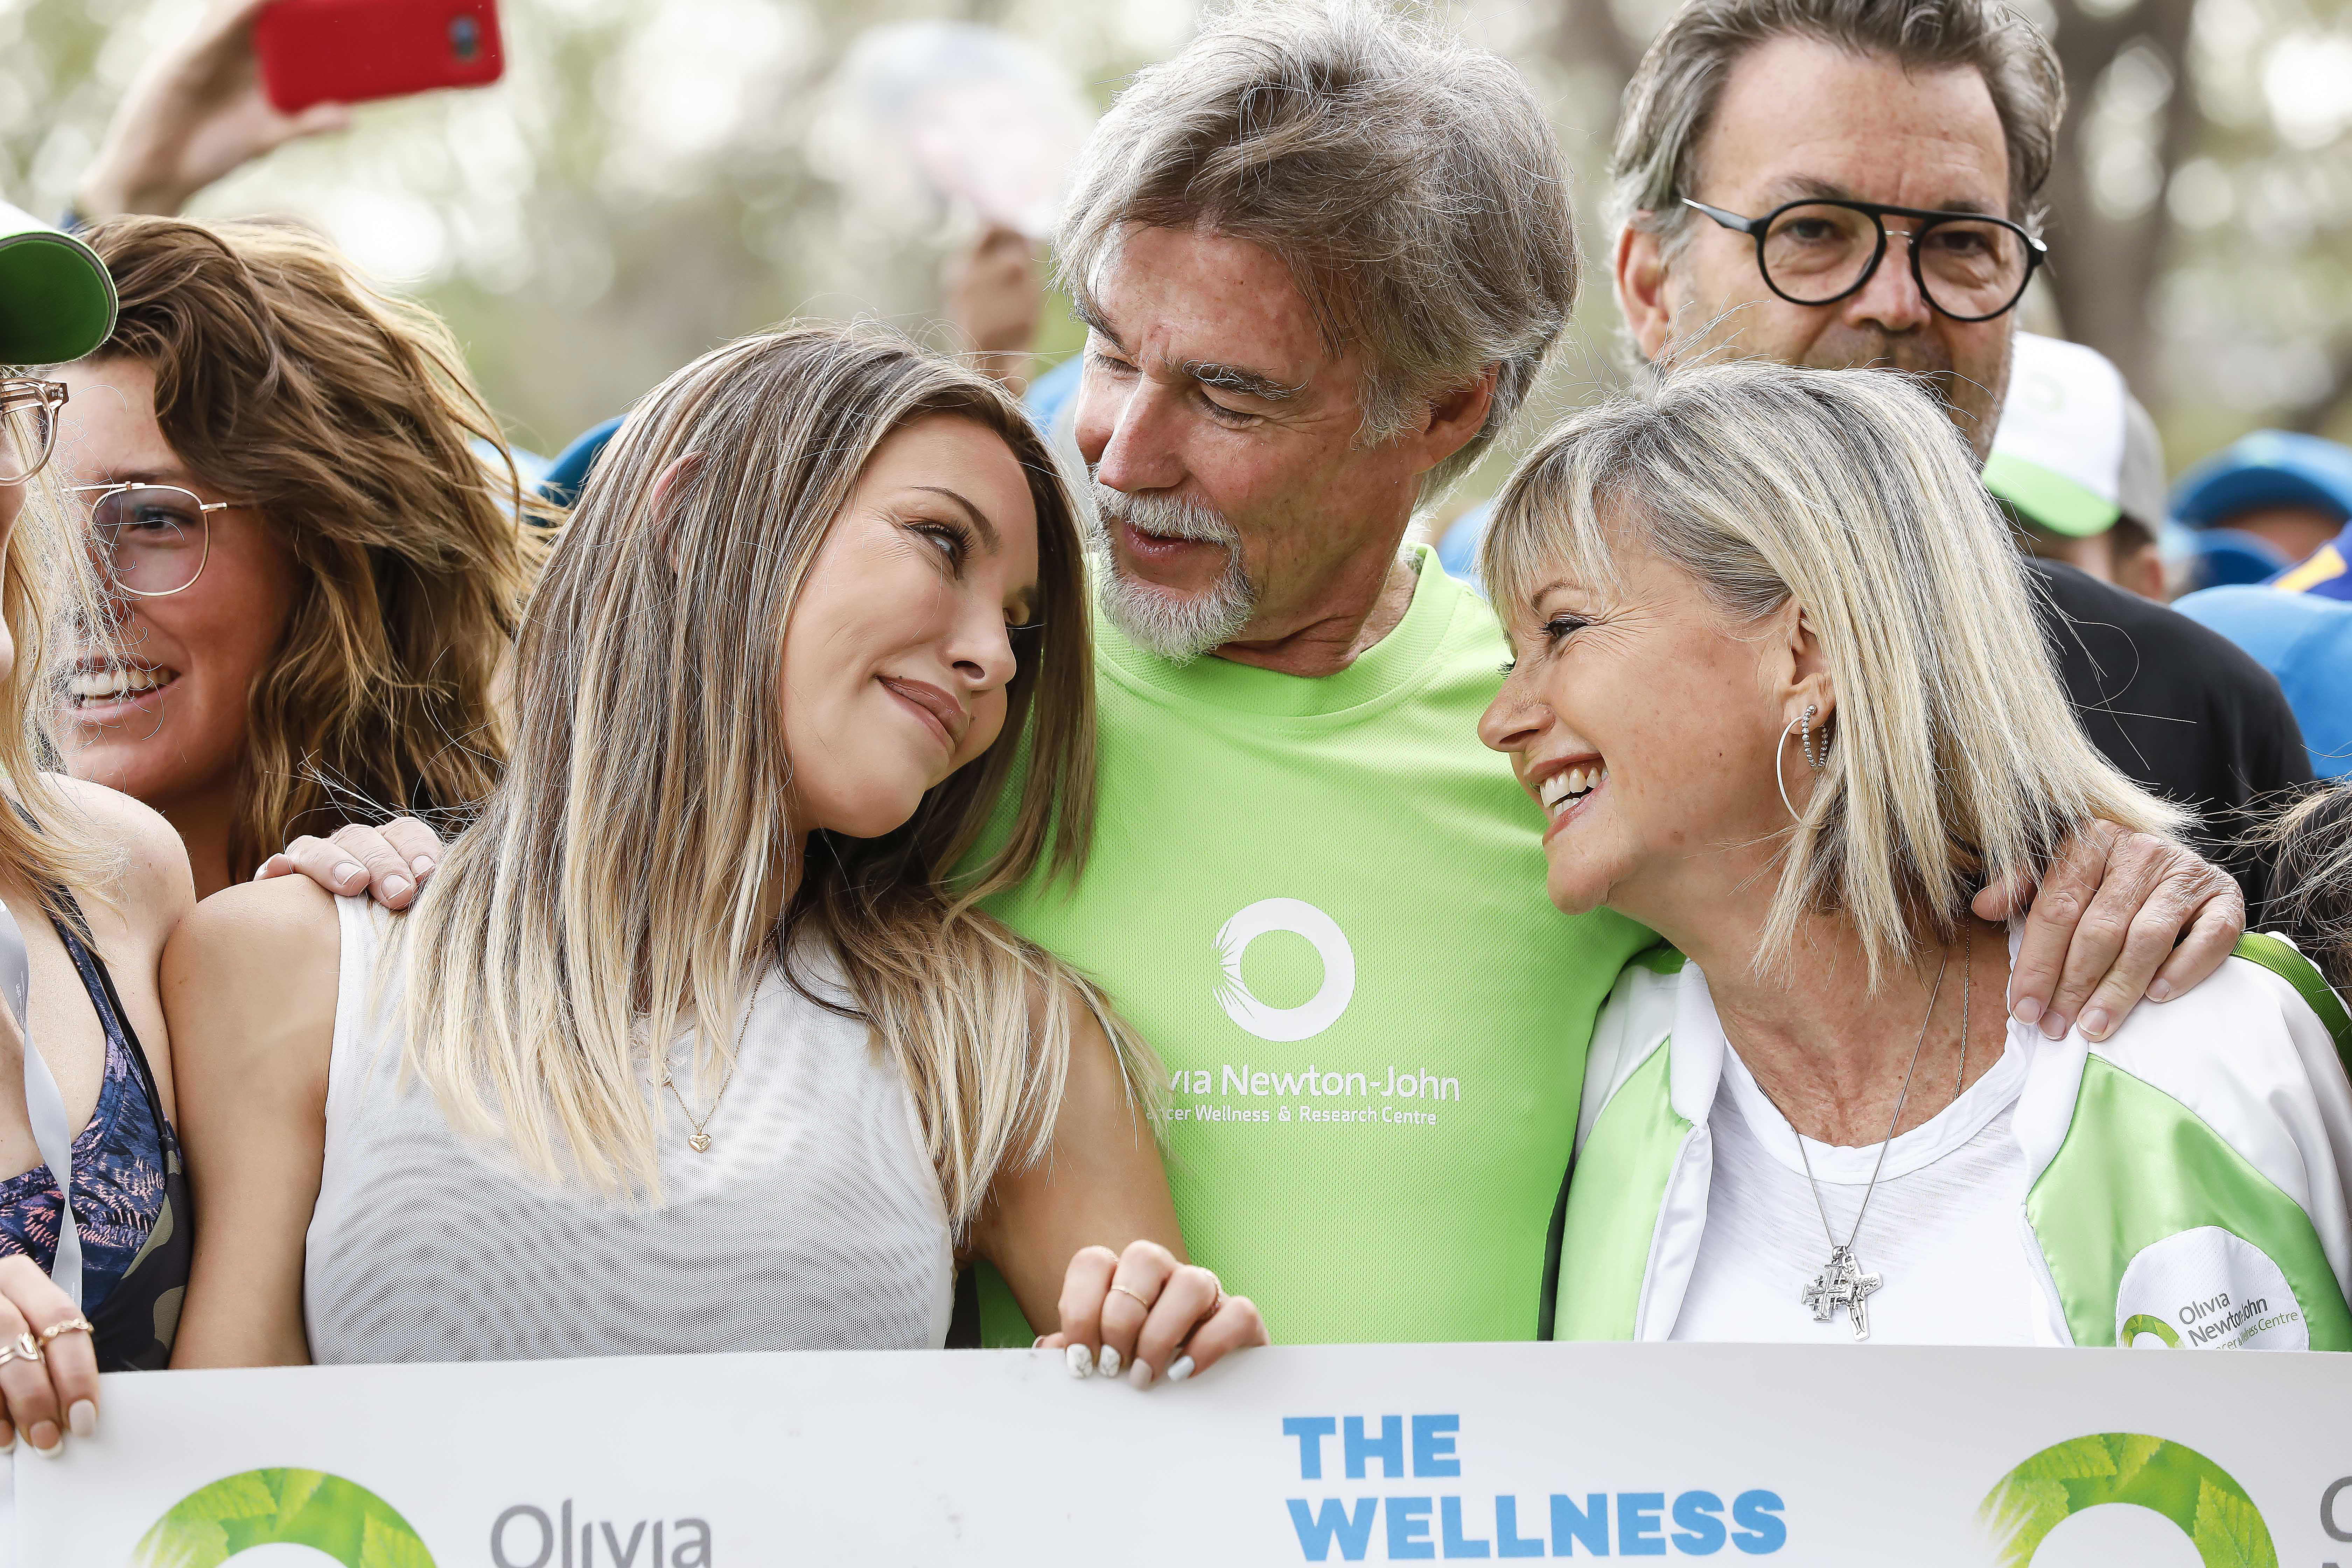 Chloe Lattanzi, John Easterling and Olivia Newton-John at the Wellness Walk and Research Run in Melbourne, Australia in 2019 | Source: Getty Images